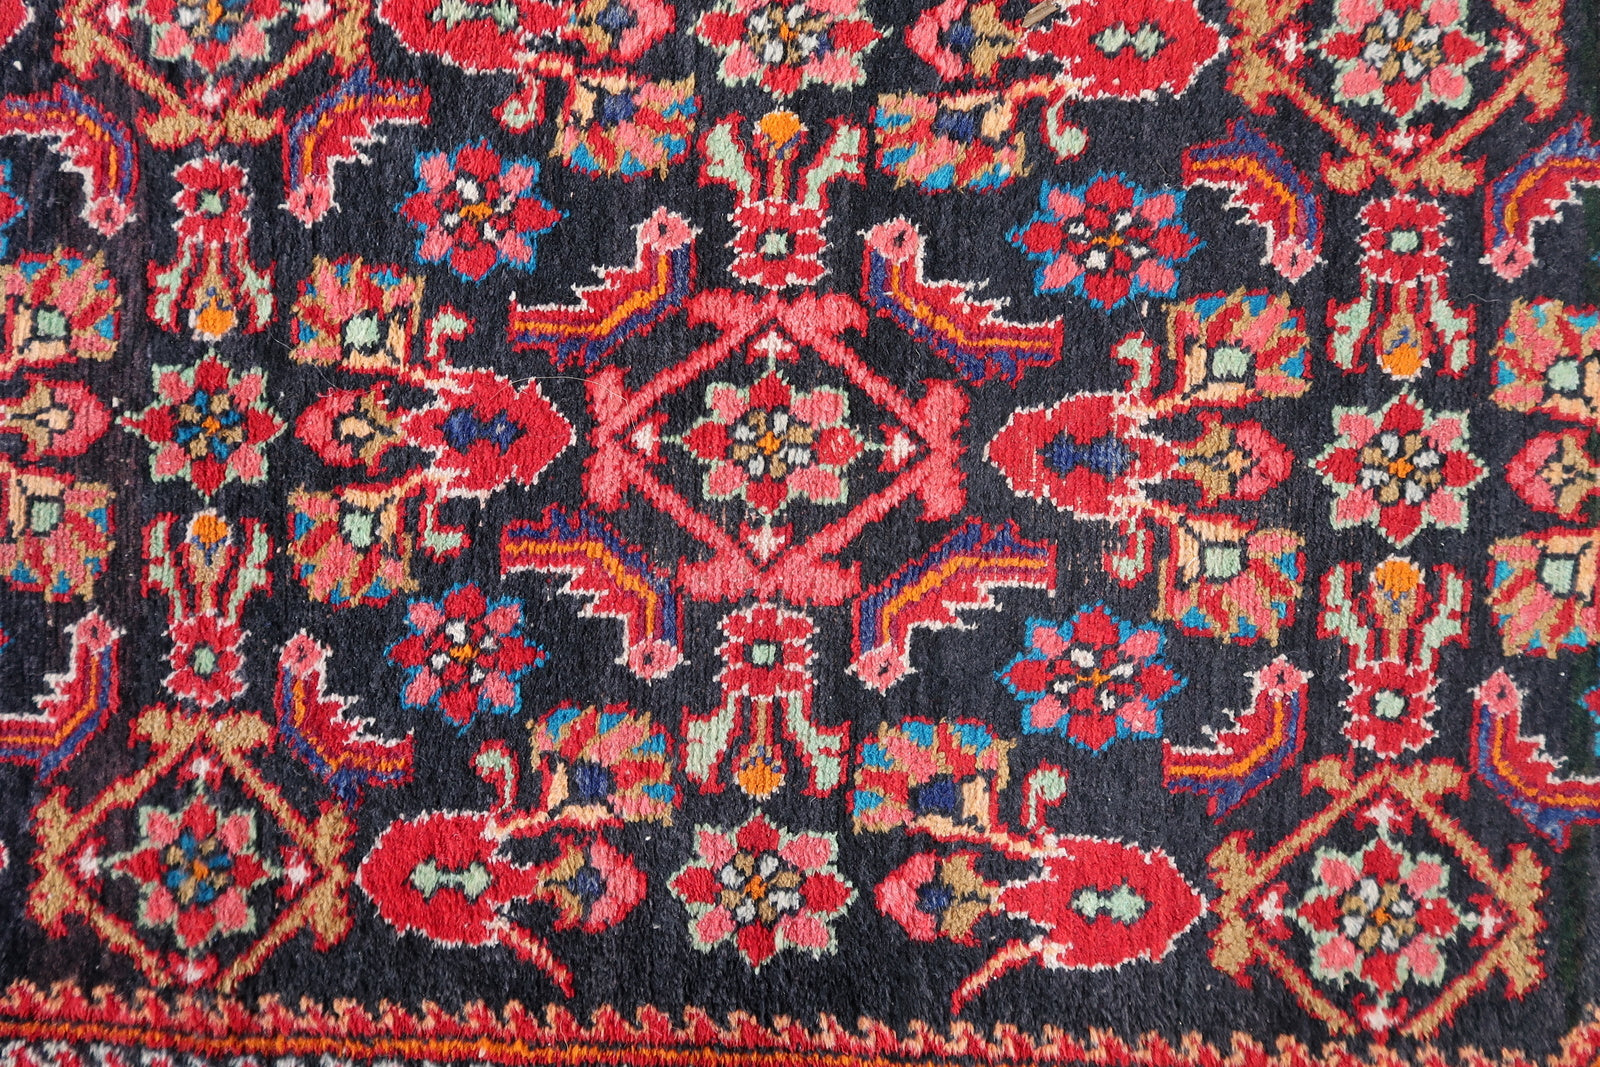 Close-up of rug's corner on Handmade Vintage Persian Hamadan Rug - Detailed view capturing the corner of the rug with its design.